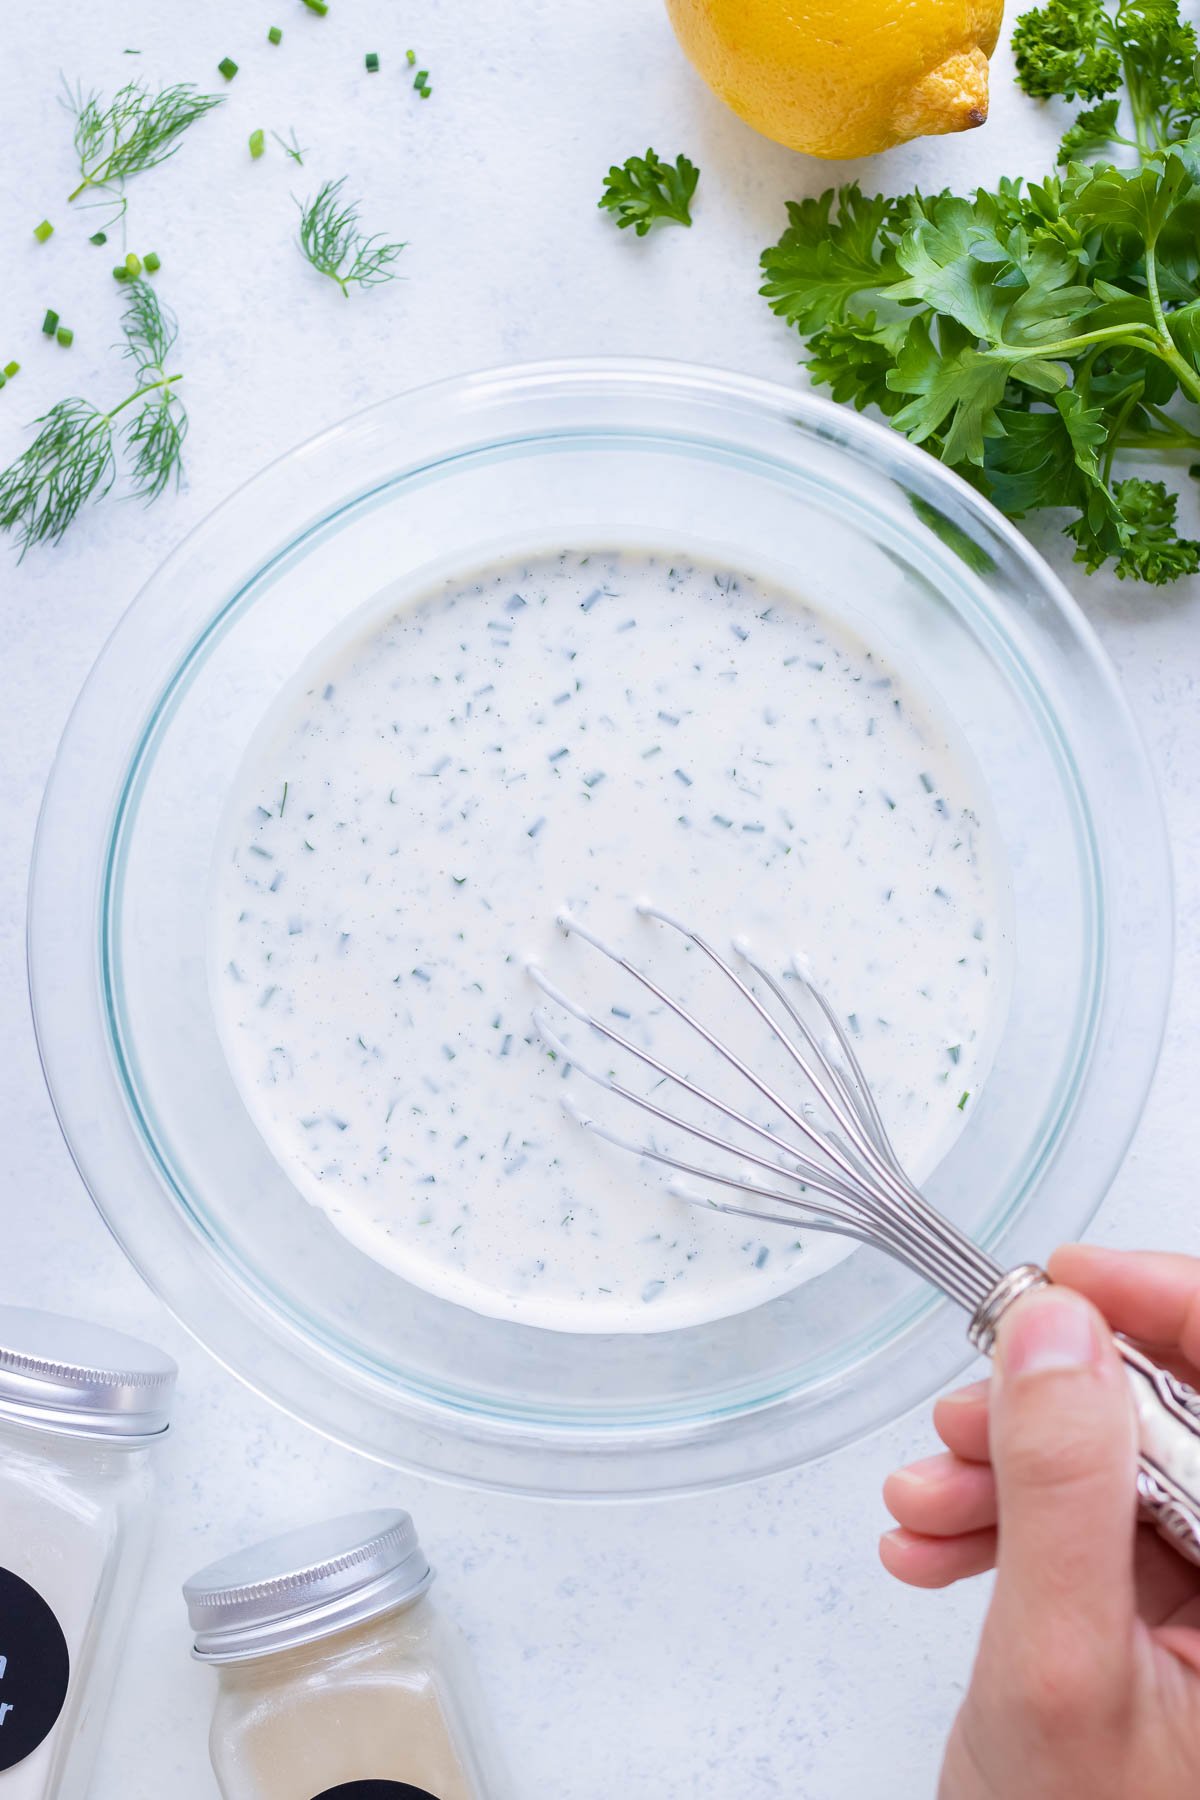 The homemade ranch dressing is made in just 5 minutes with a whisk.